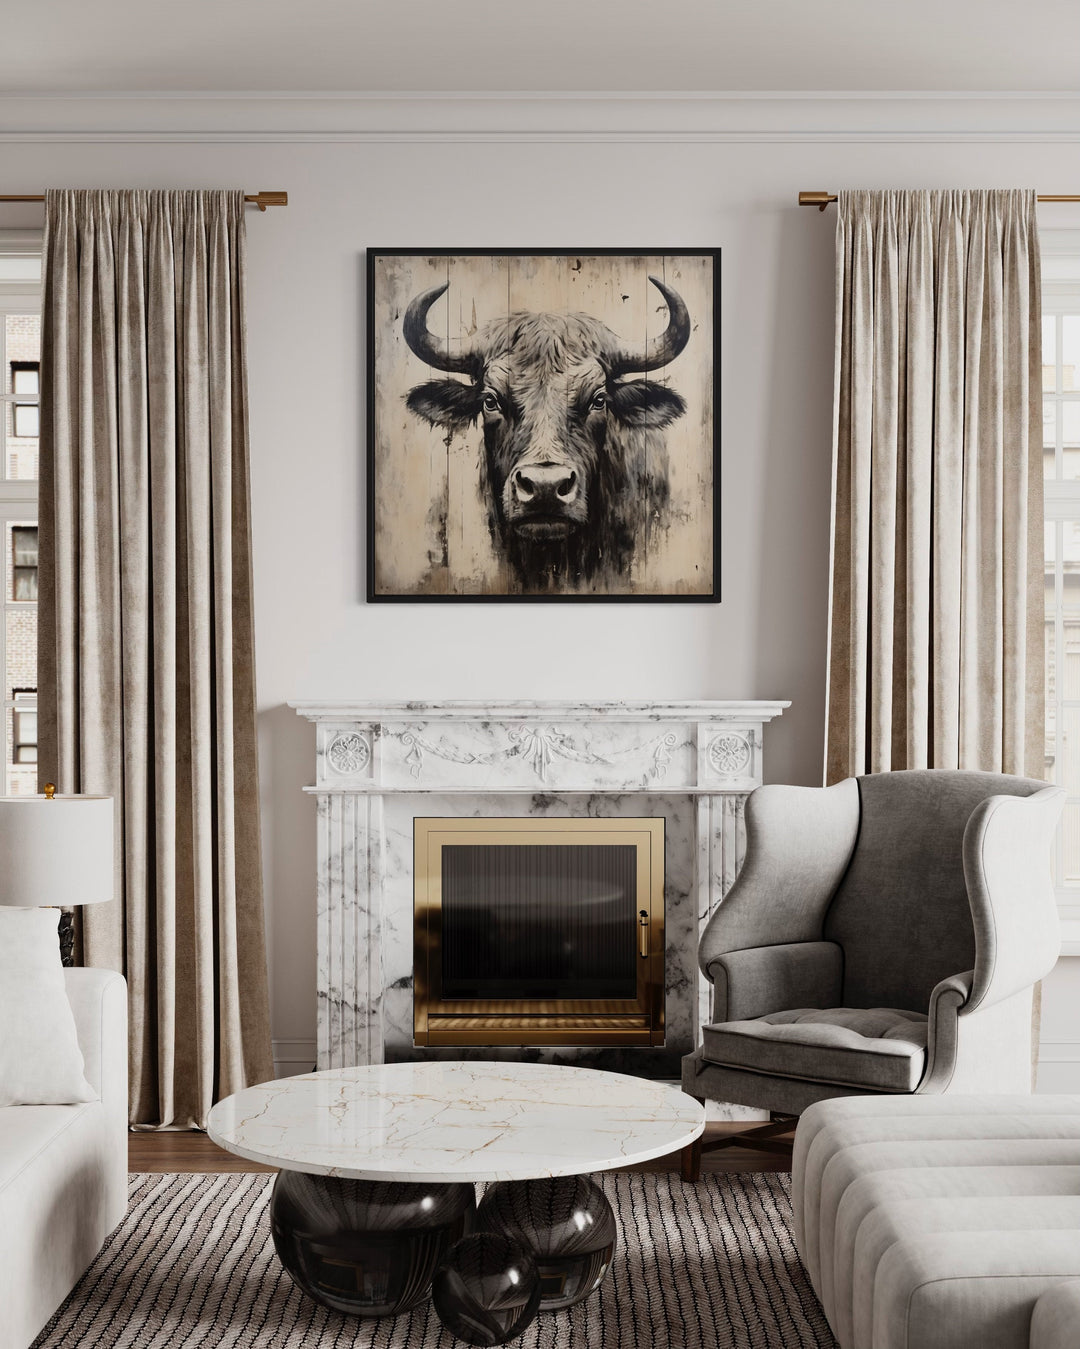 Bull Portrait on Distressed Wood above fireplace